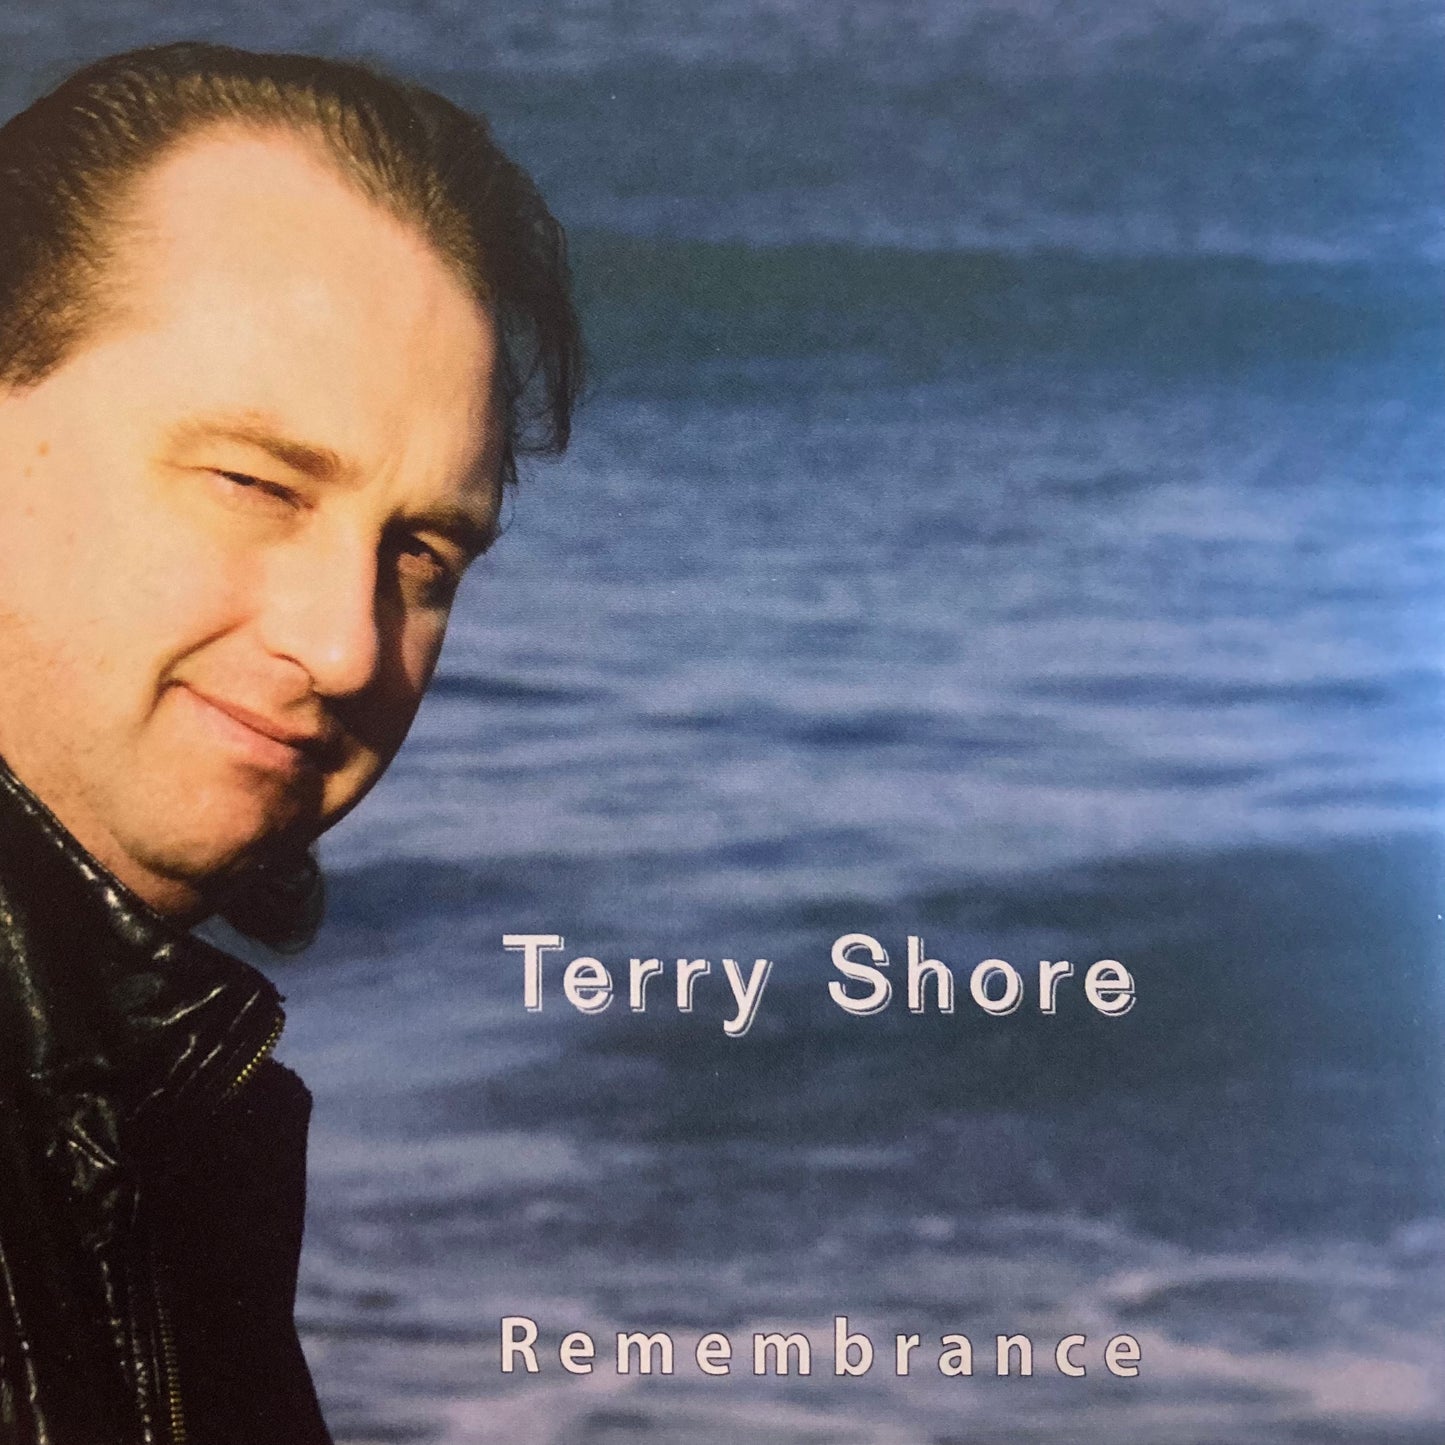 Terry Shore - Remembrance EP | Buy the CD from Flying Nun Records